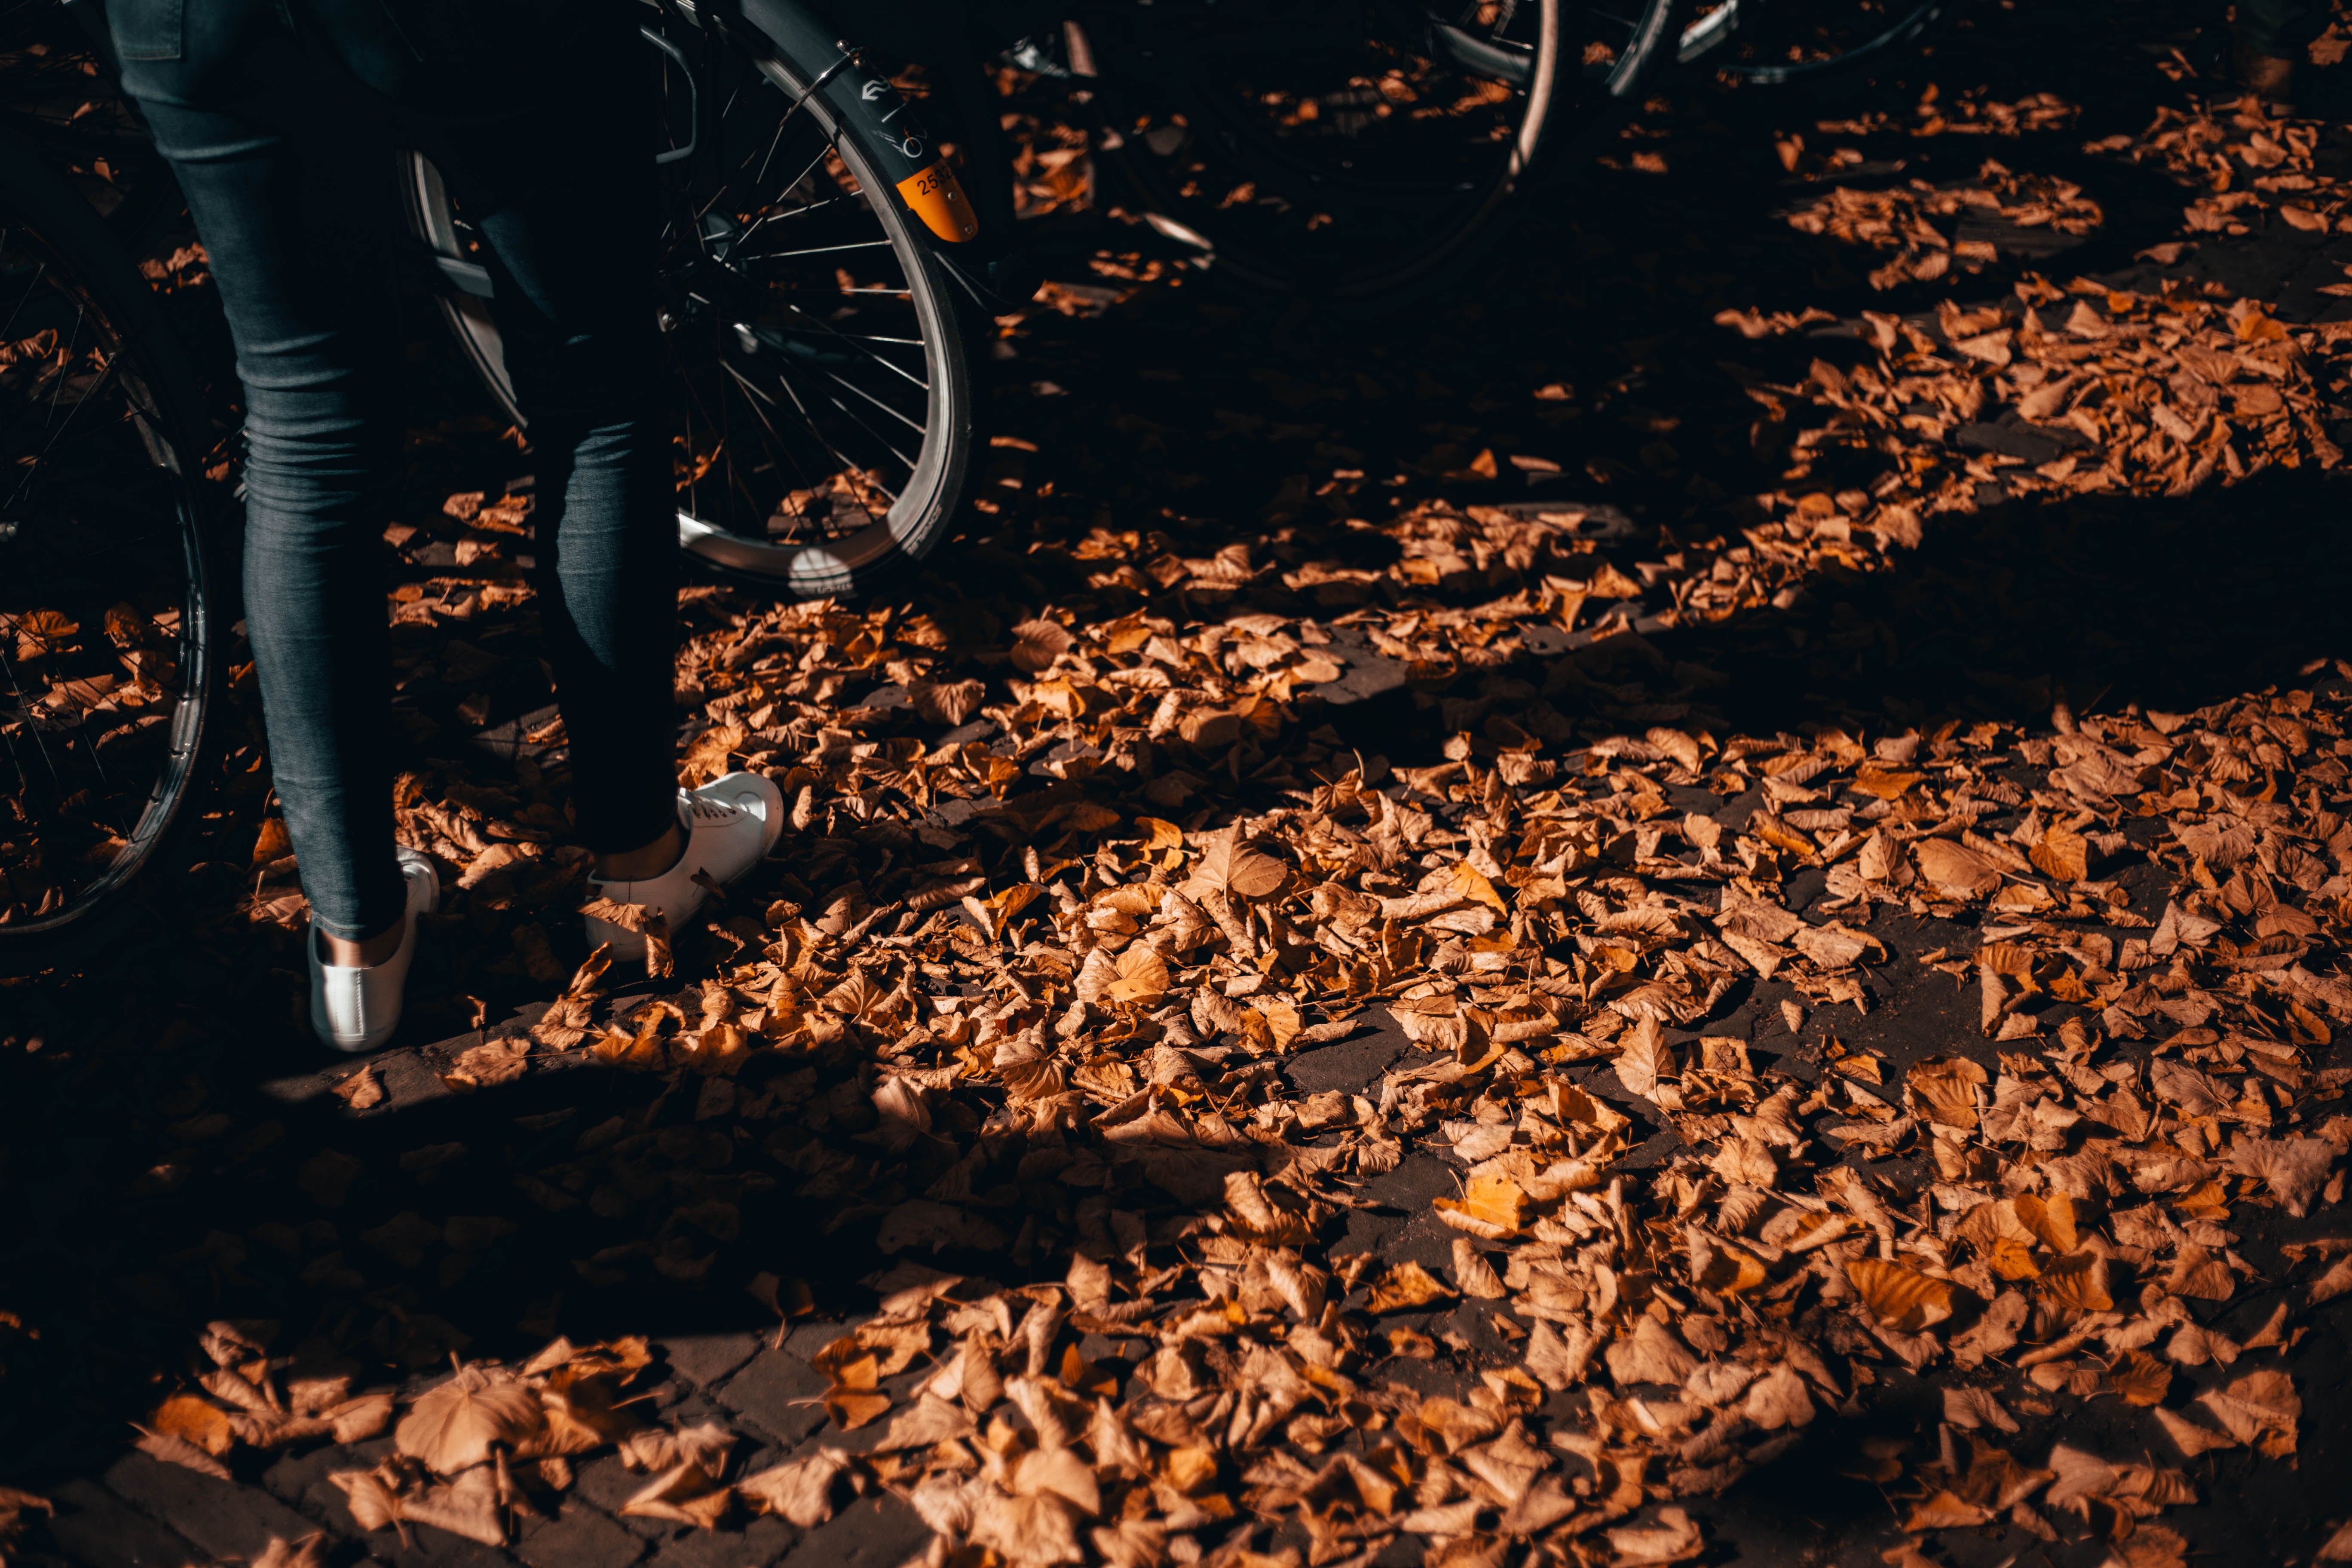 5 Tips For Getting Ready for Autumn Biking - Ride Safely & Comfortably